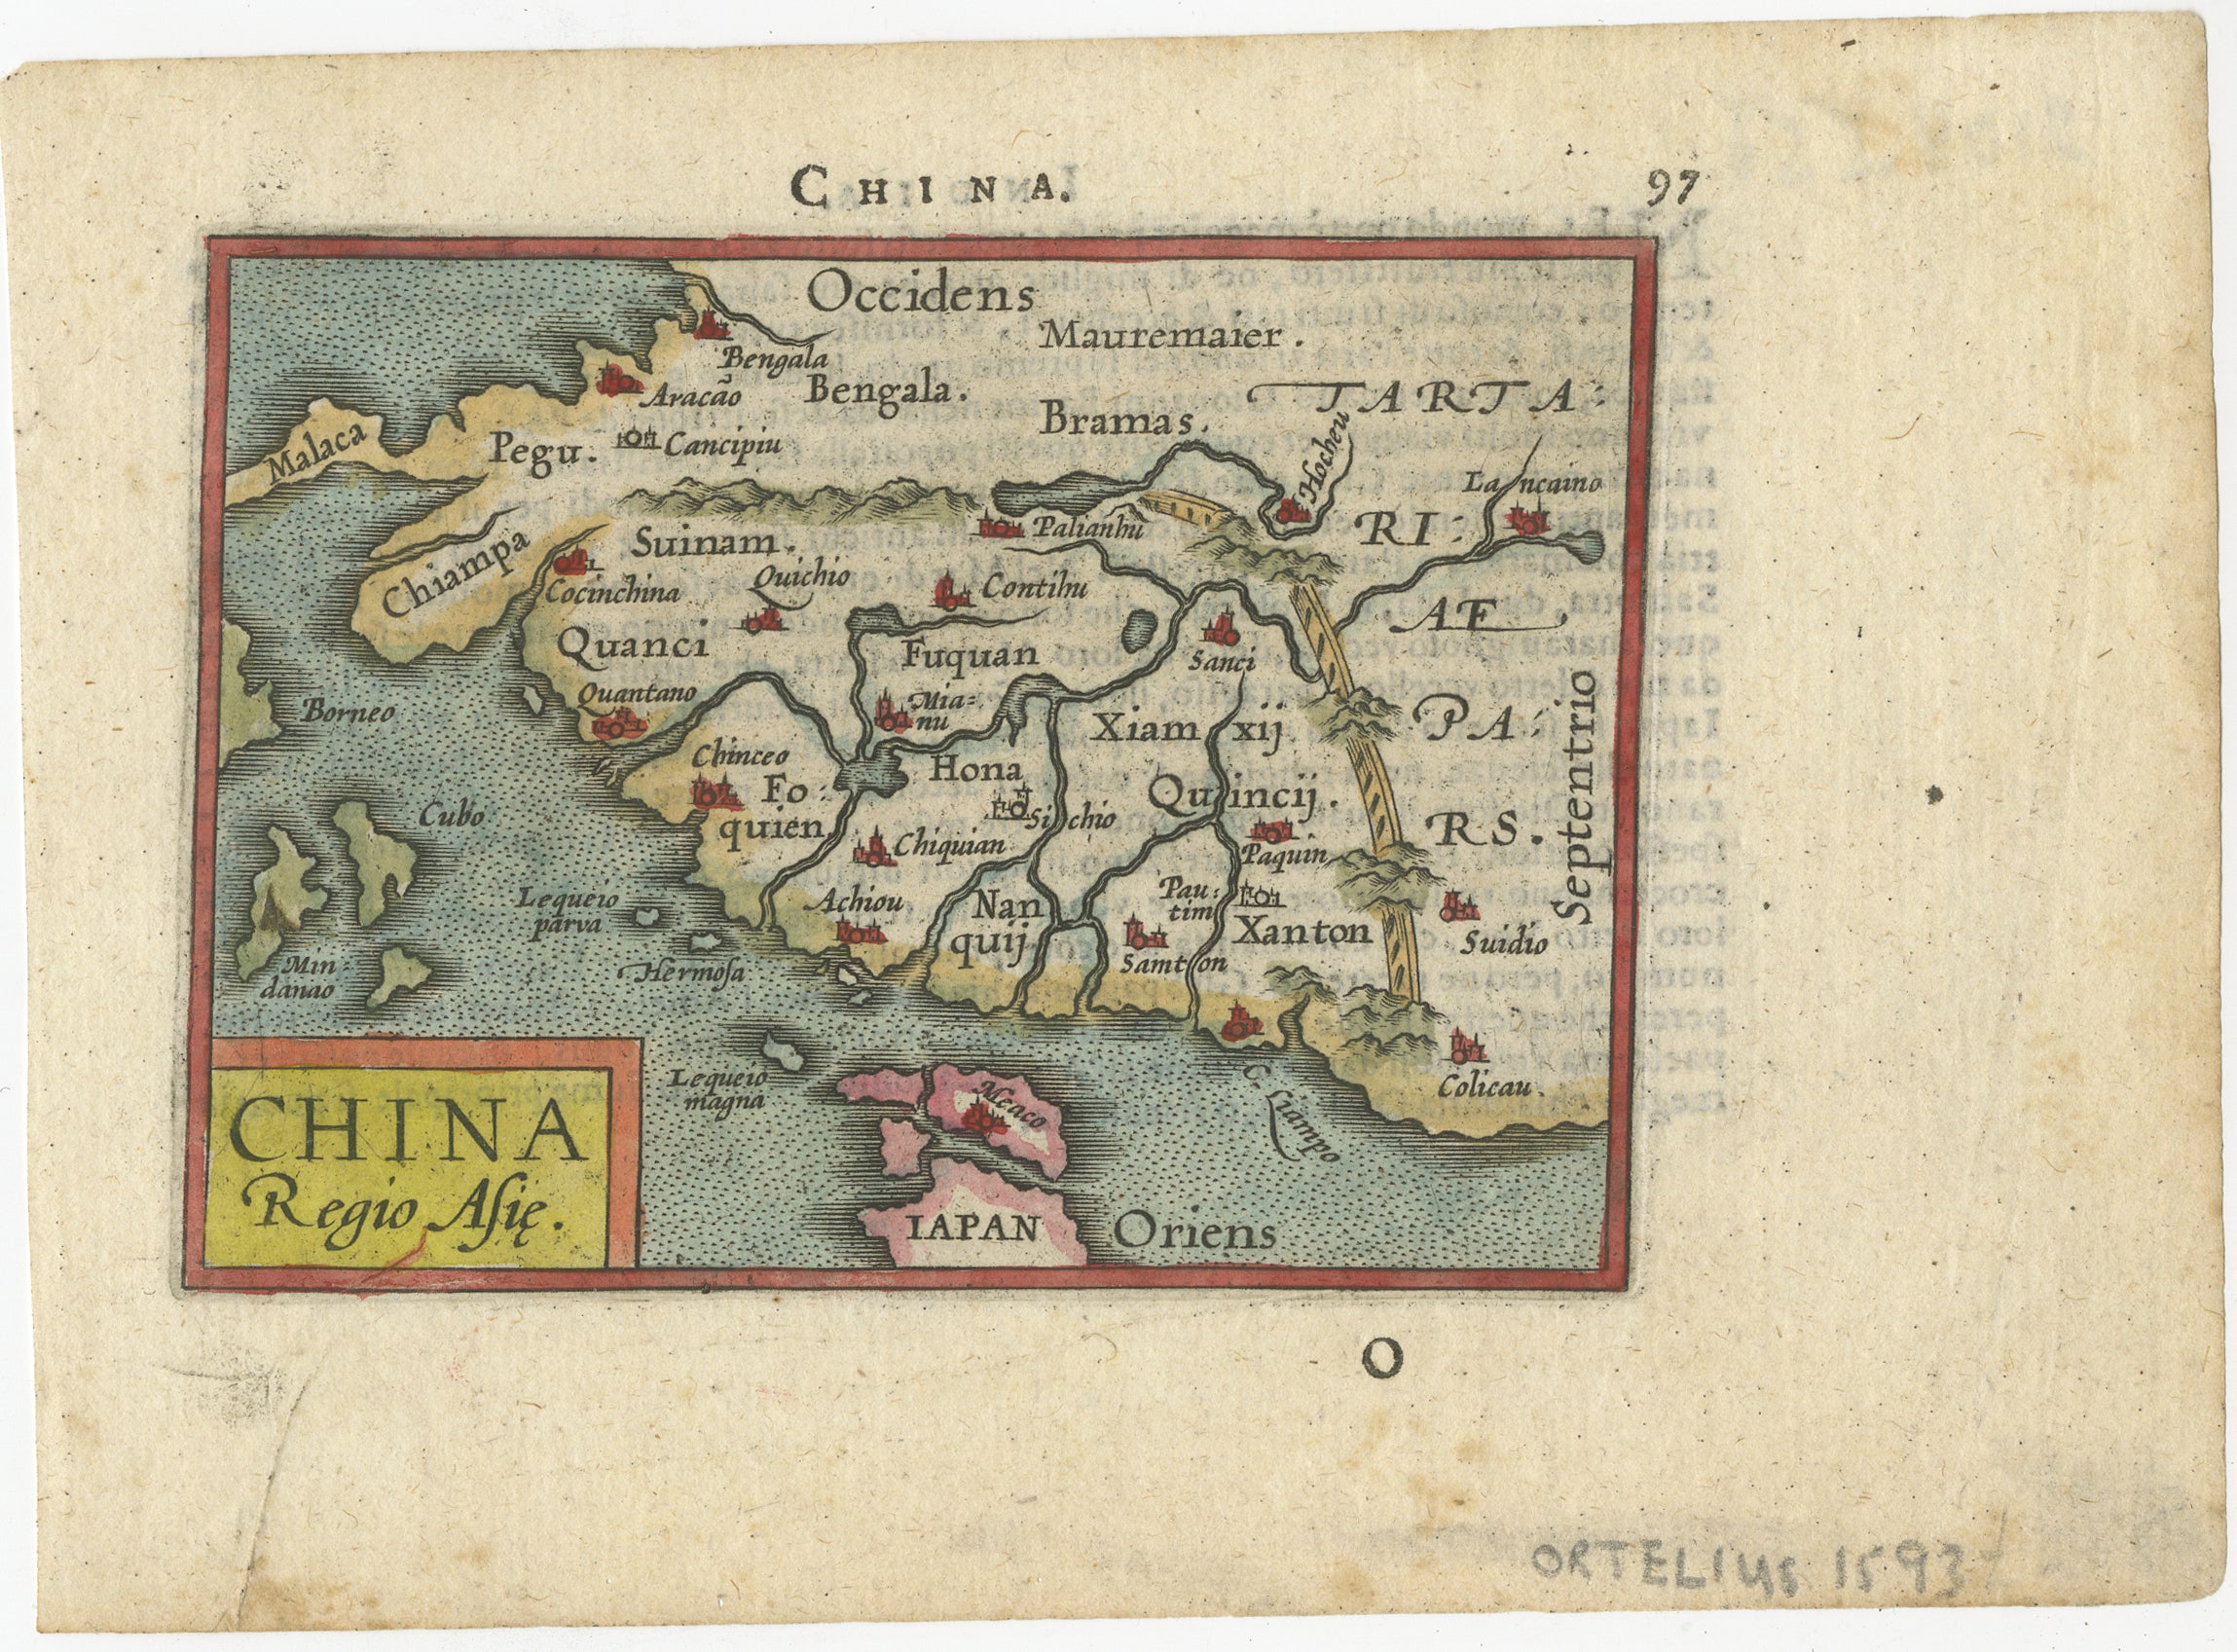 Very handsome original old coloured copper engraving of China. The northern part of Japan is projected as well. Many cities and areas are mentioned in the old spelling, incl Malacca, Bengala, Bramas, Canton, Suinam, Chiampa, Borneo and more. Also a